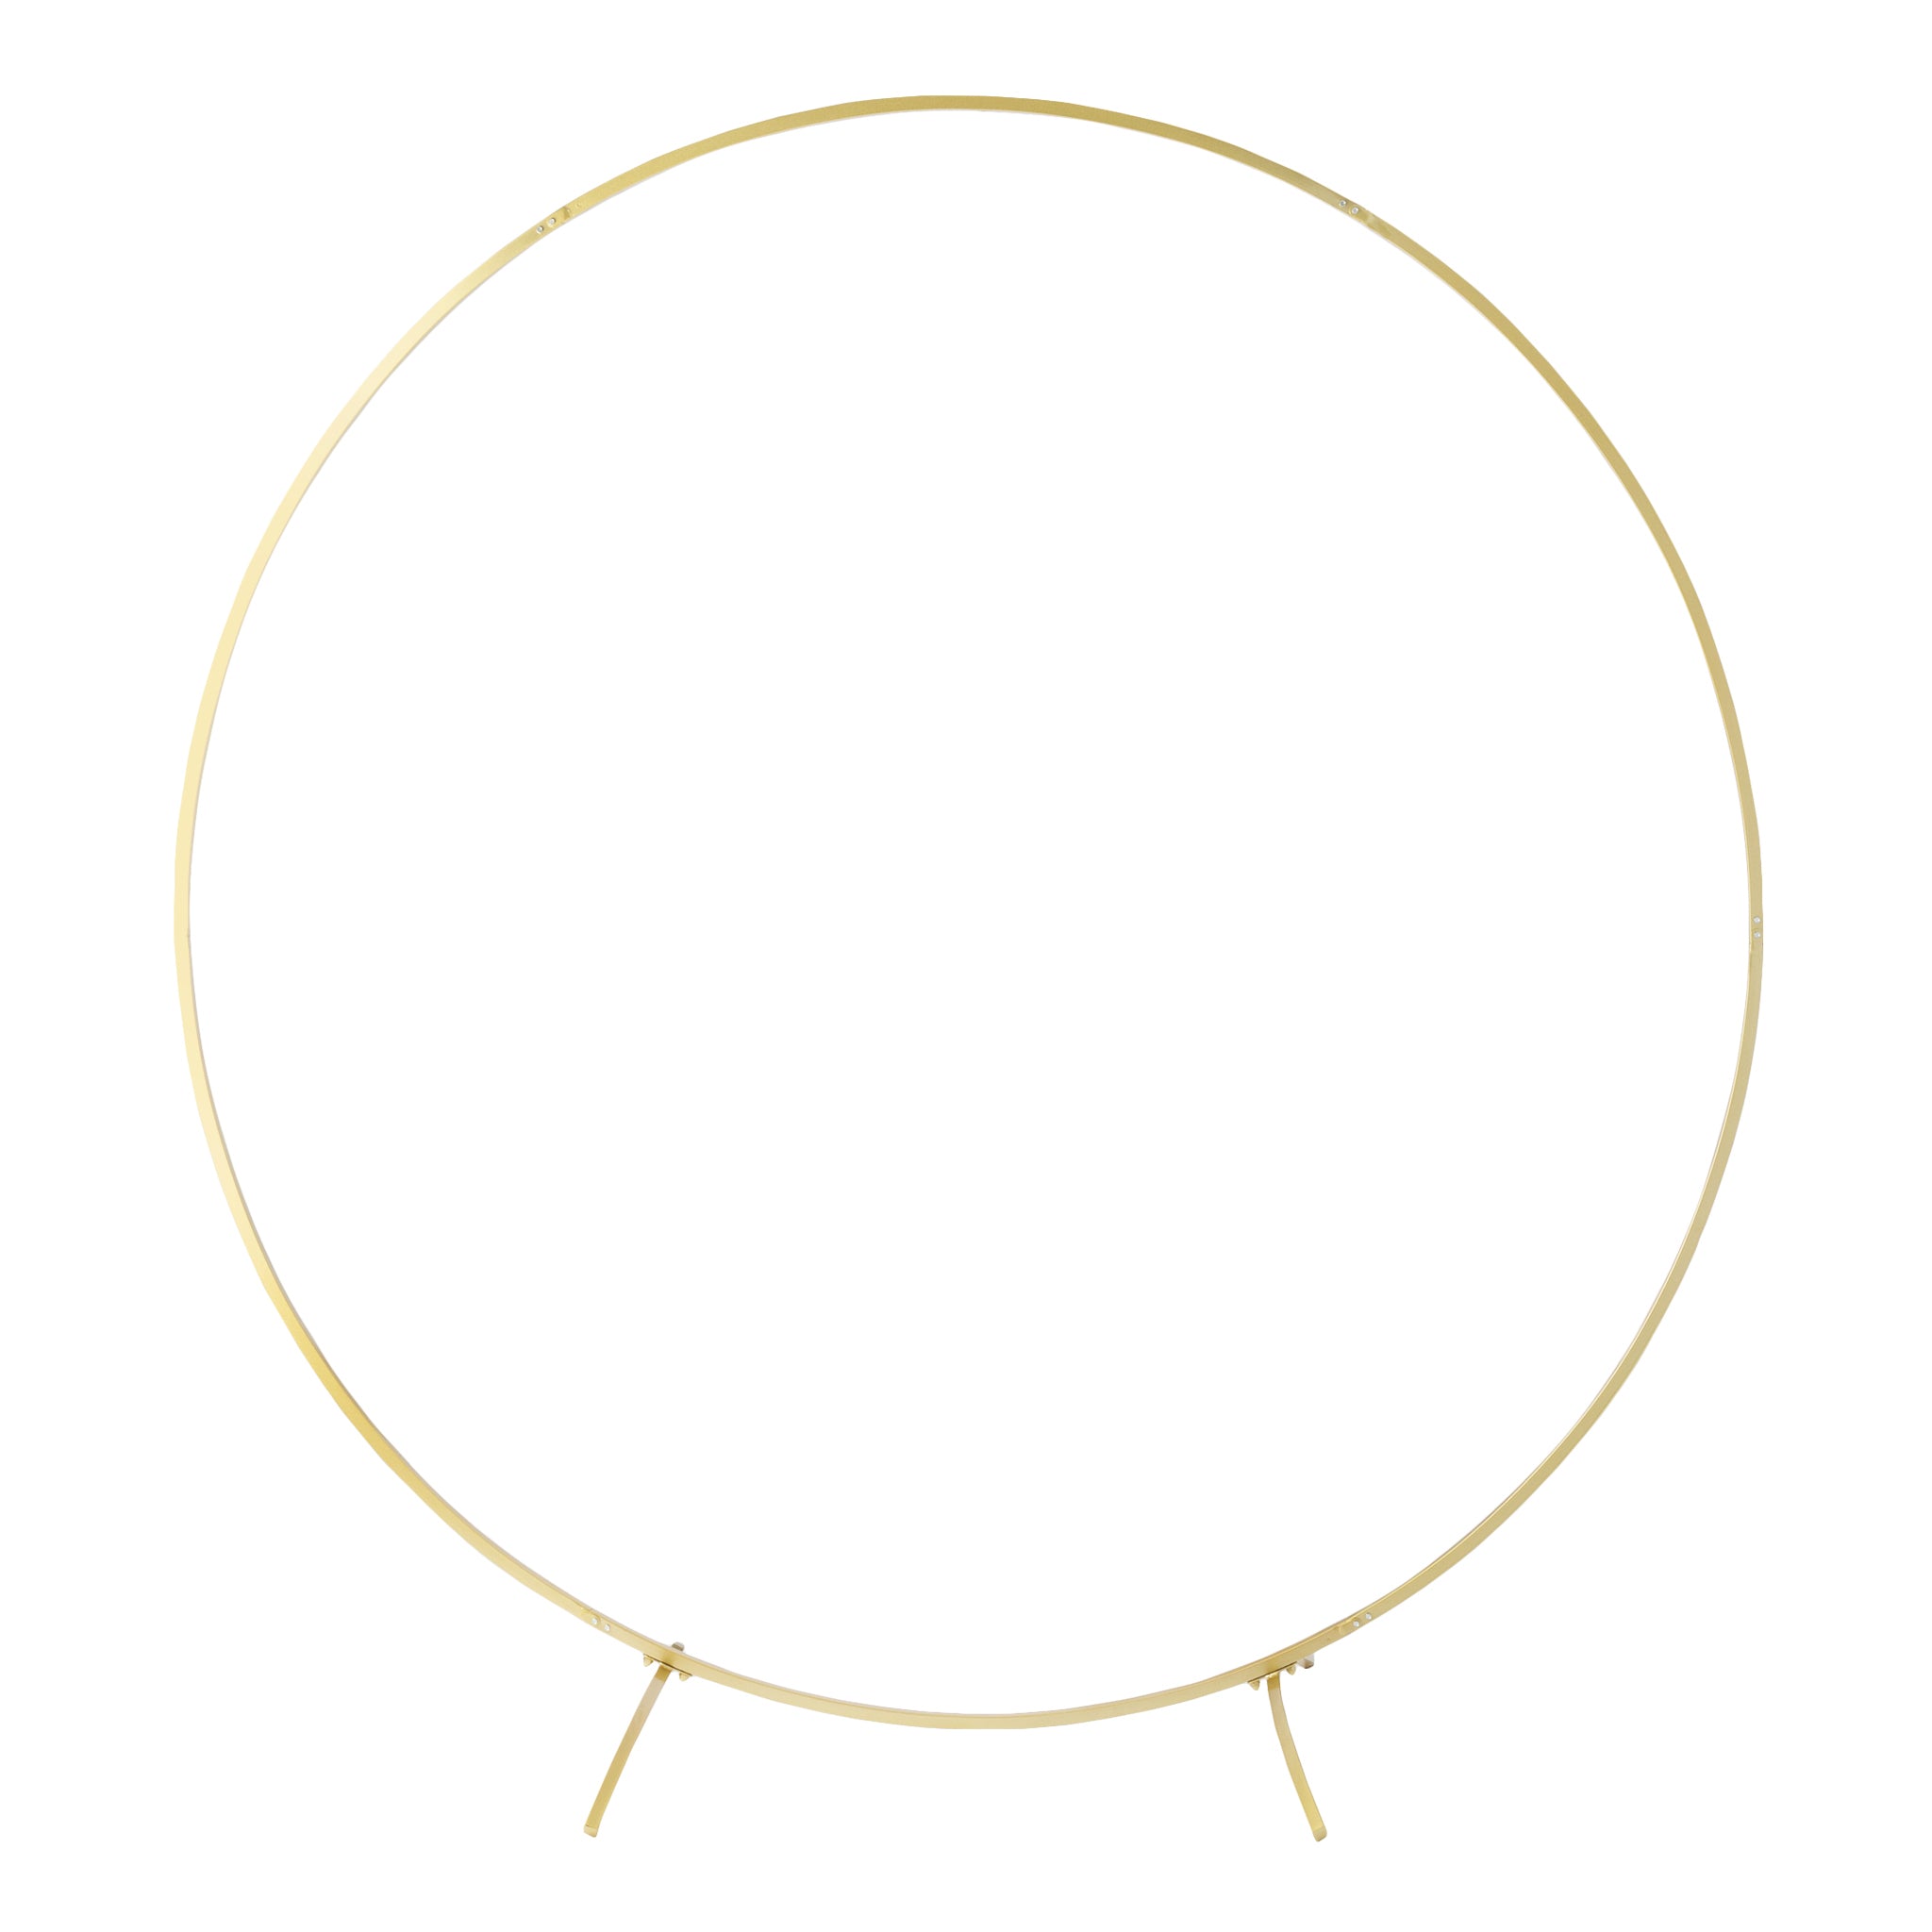 Gold Celebration Blank Round Frame High-Res Vector Graphic - Getty